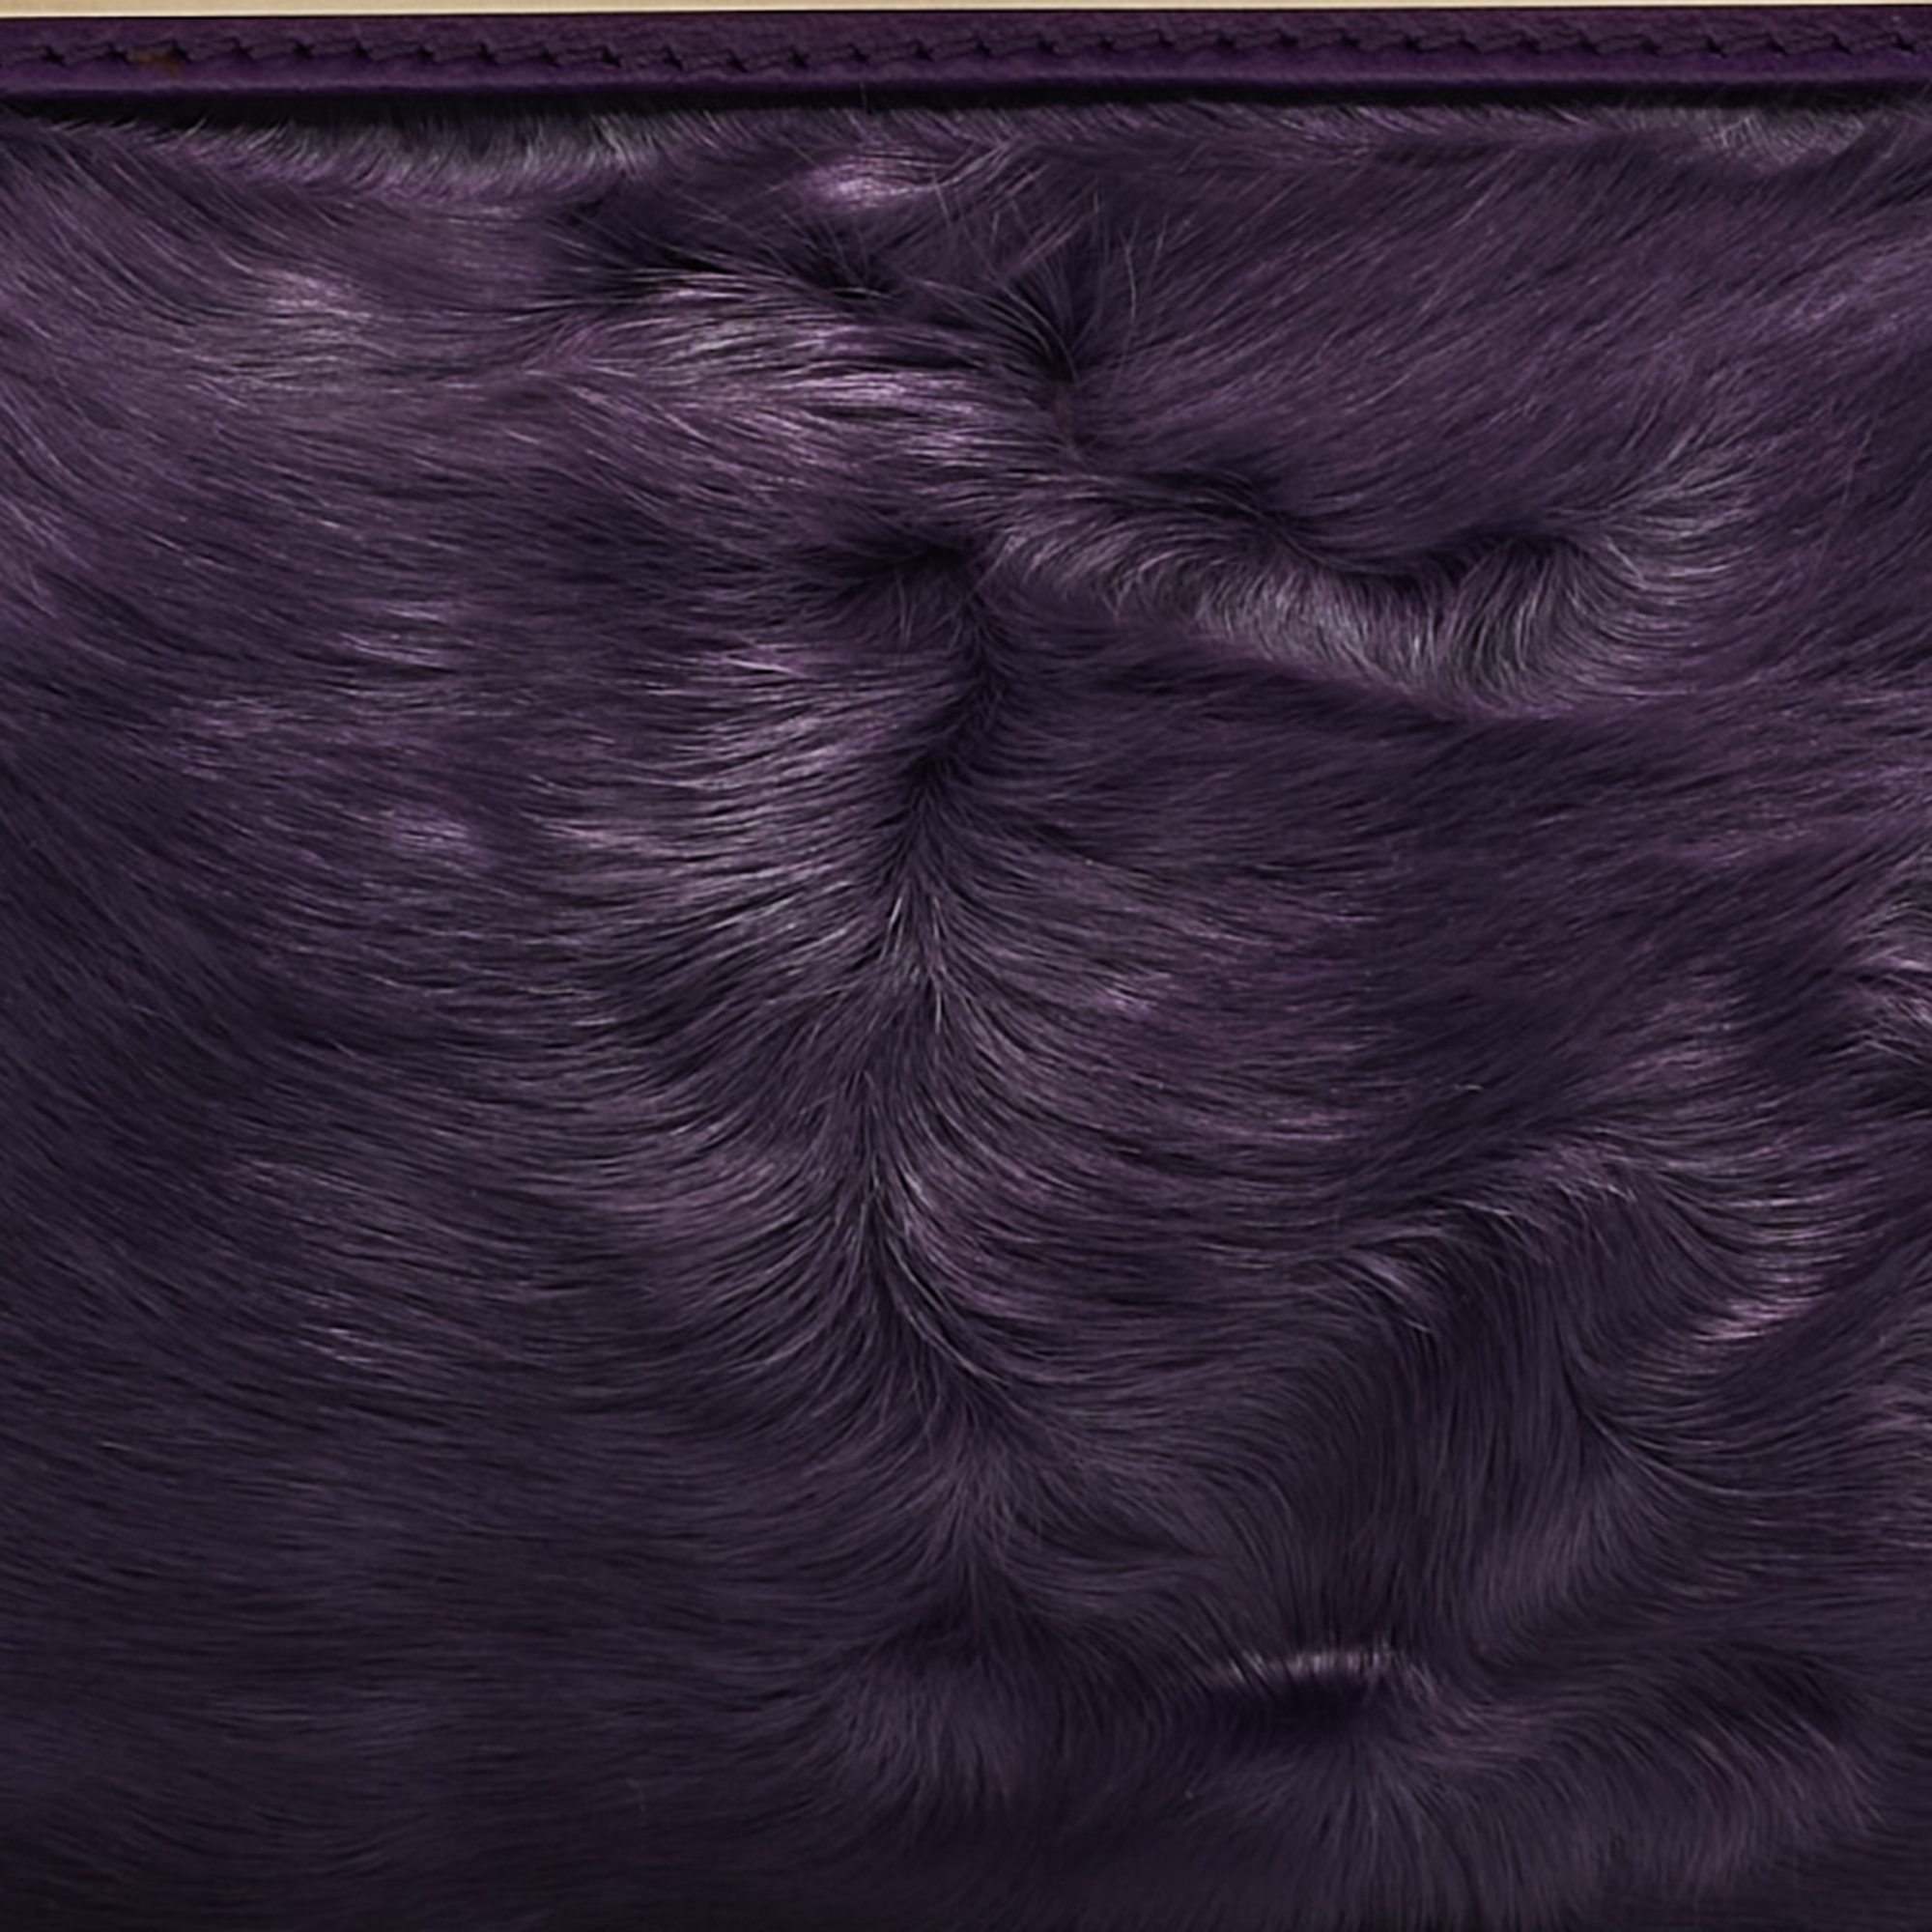 Versace Purple Calfhair And Leather Metal Clutch